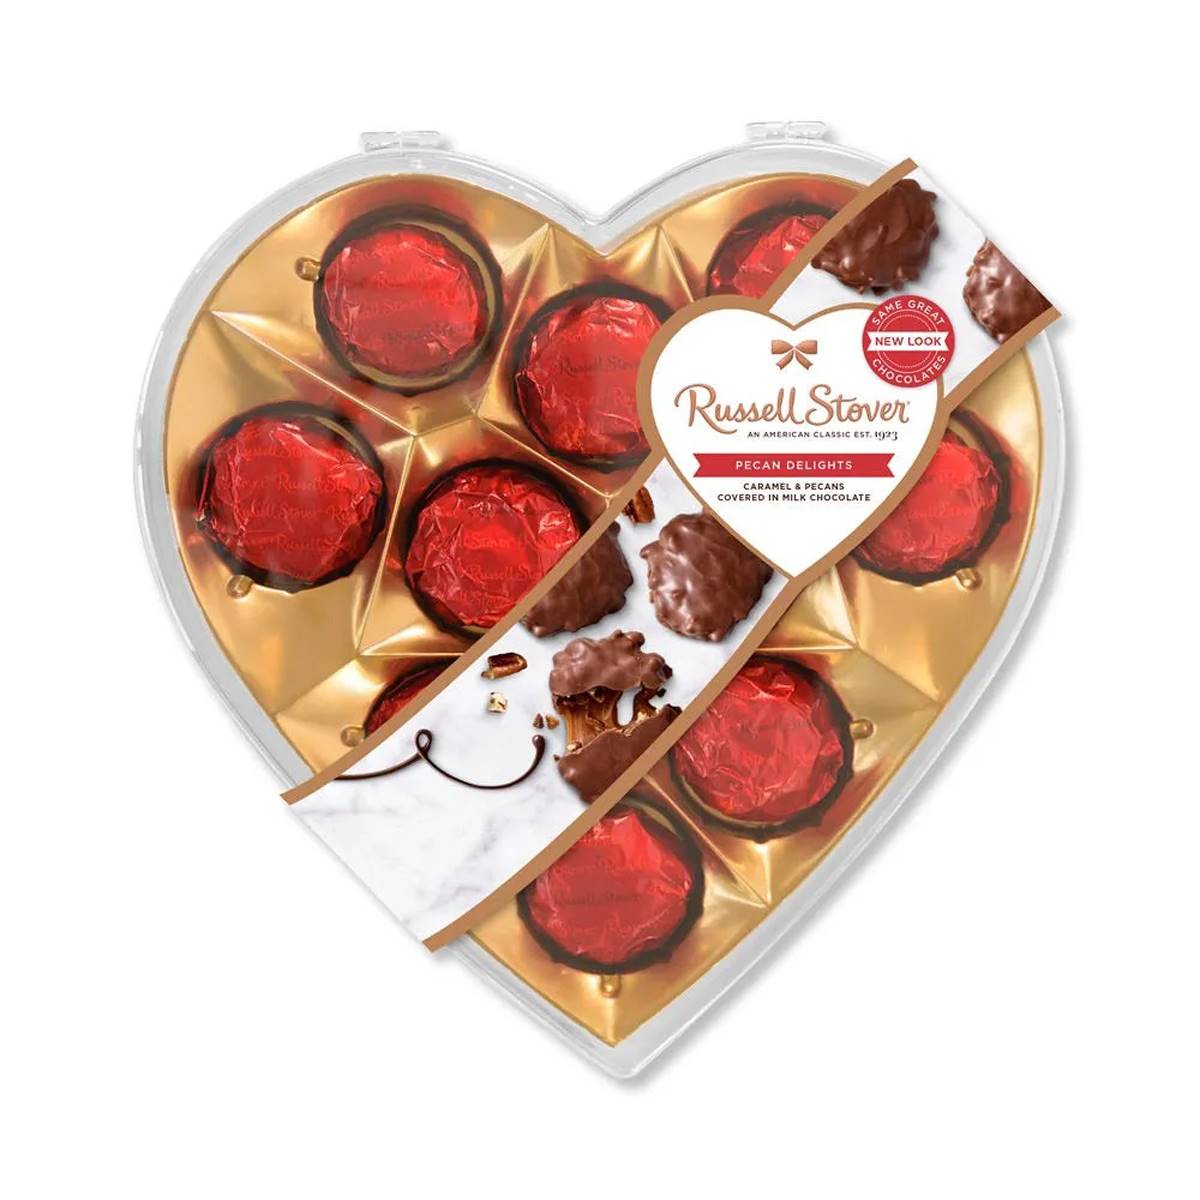 Russell Stover 8.8oz. Pecan Delight Gift Heart